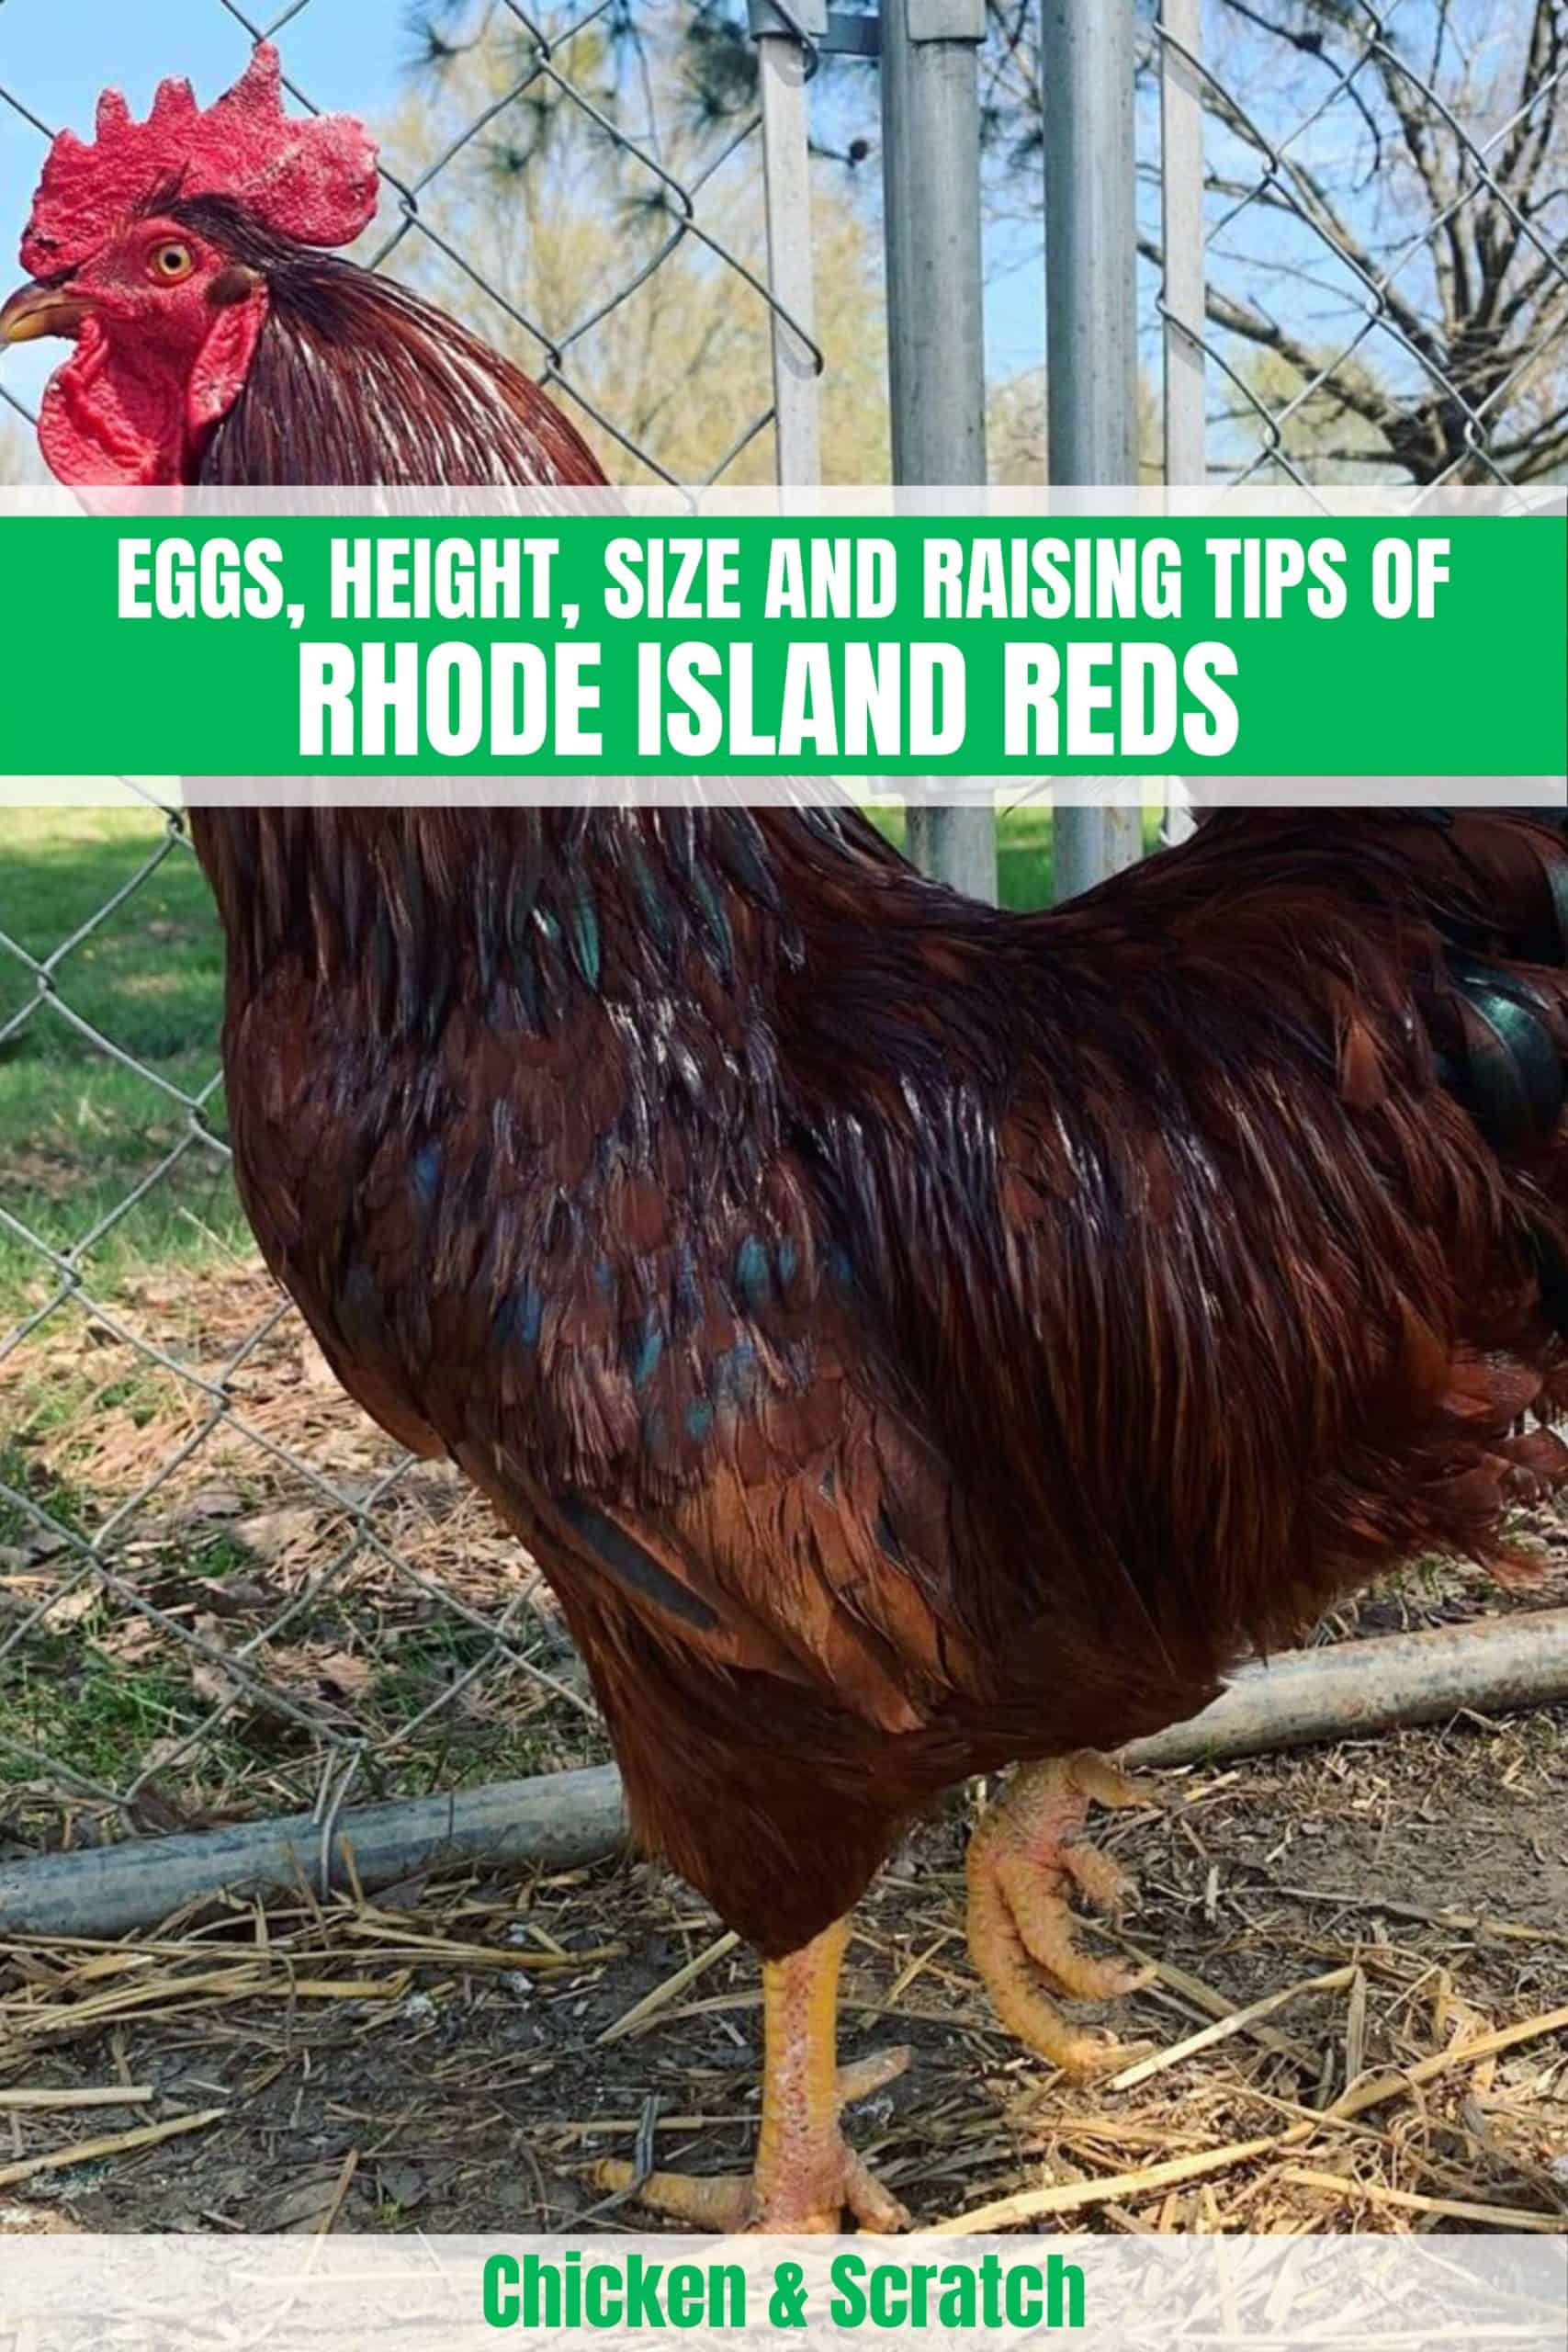 When Do Rhode Island Red Chickens Start Laying Eggs?